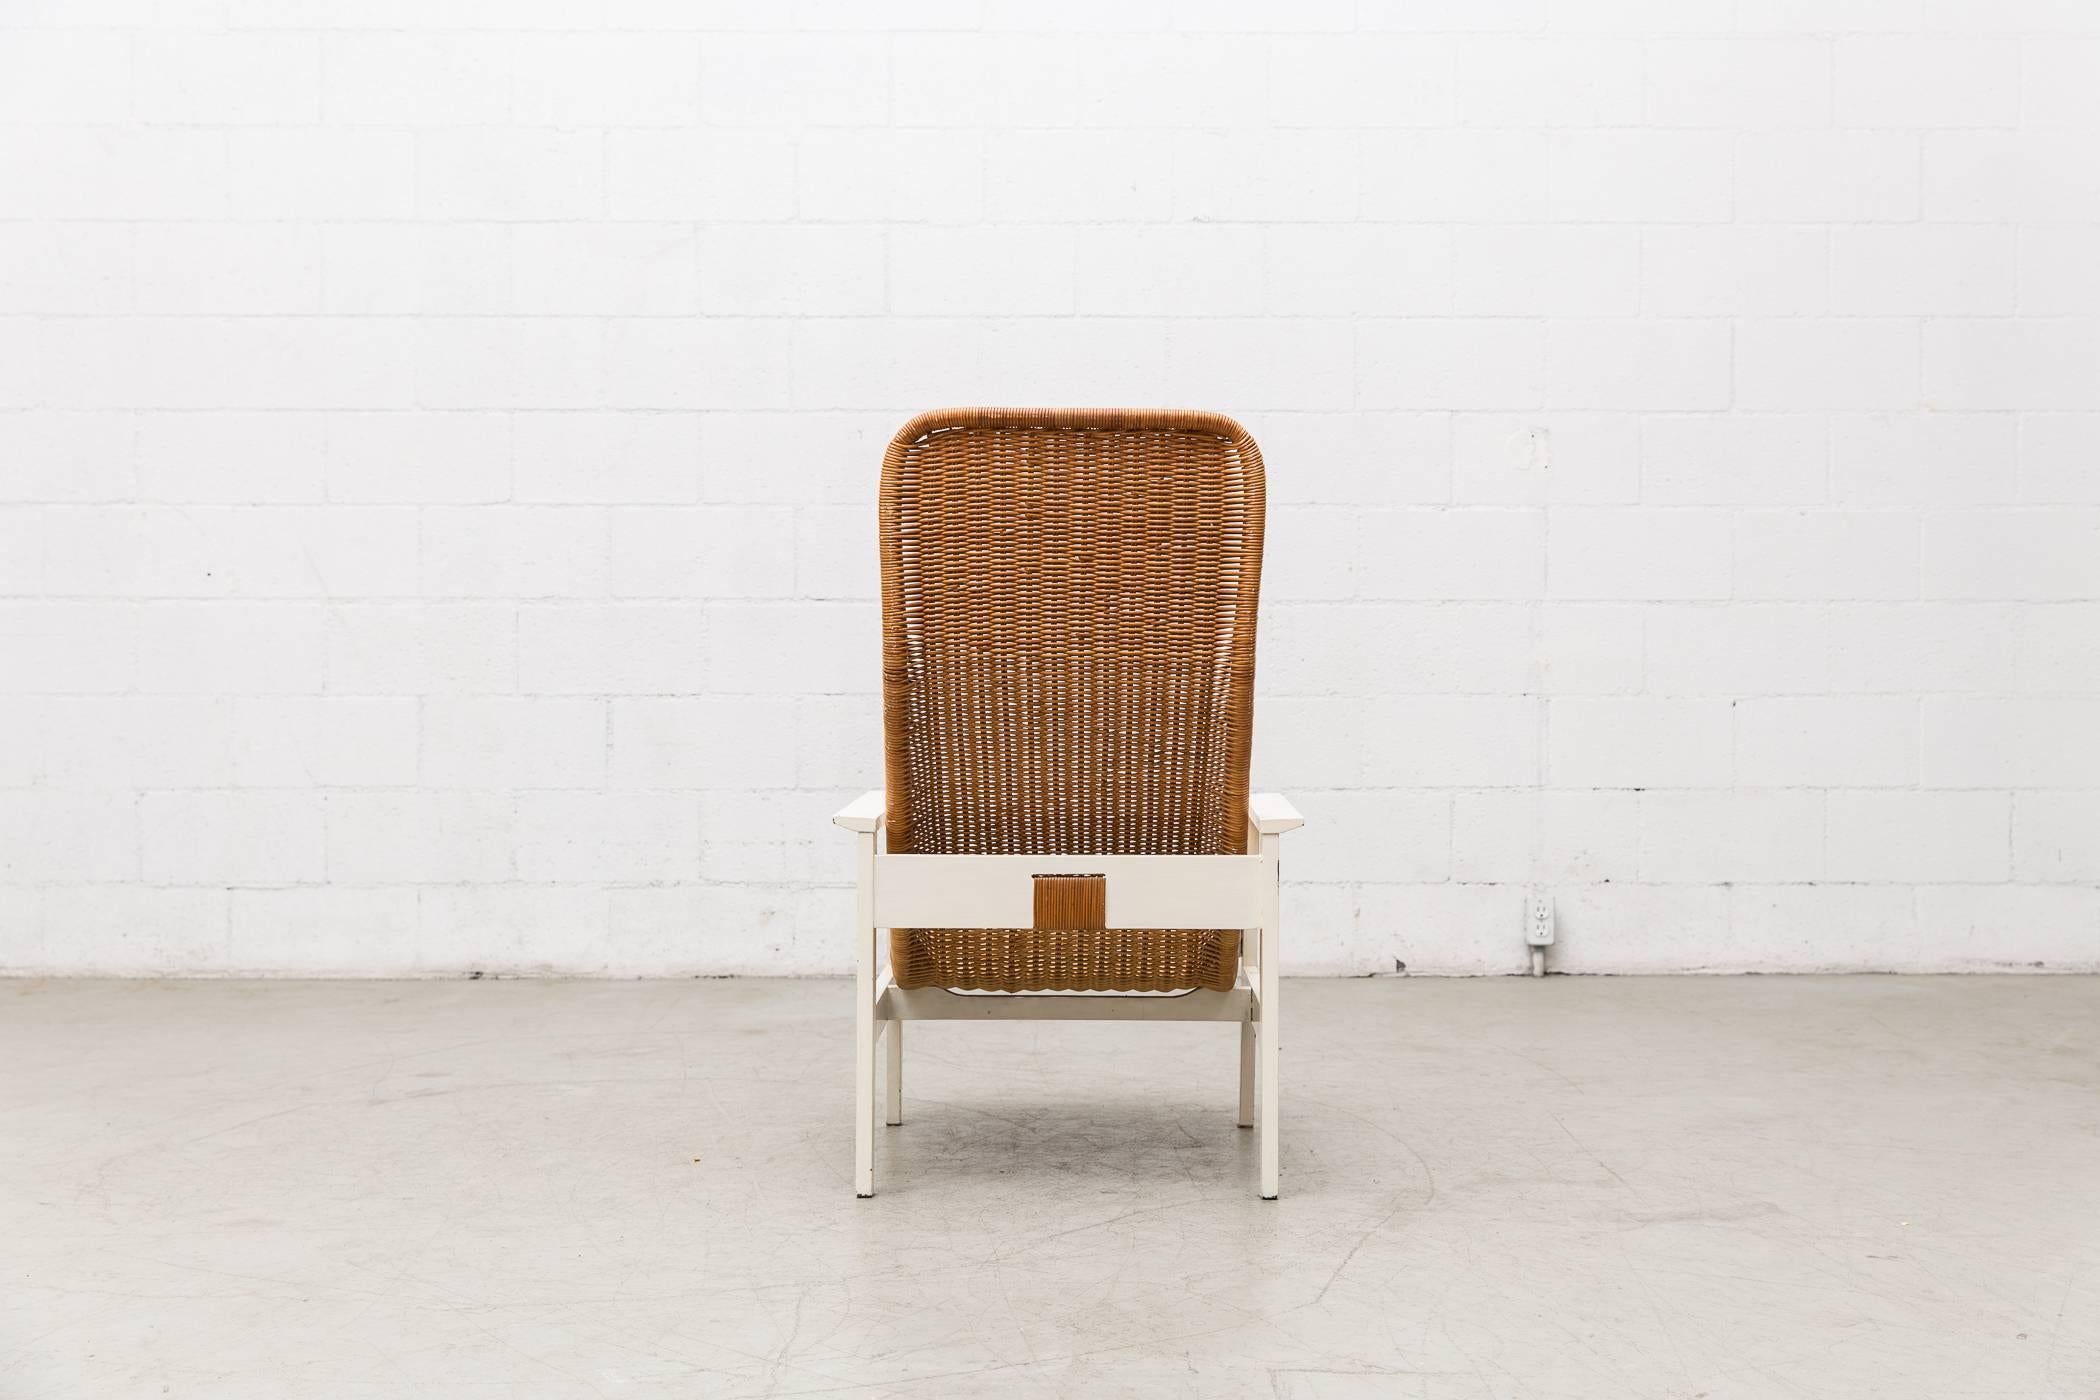 Painted Dirk Van Sliedregt High Back Rattan Lounge Chair with White Frame